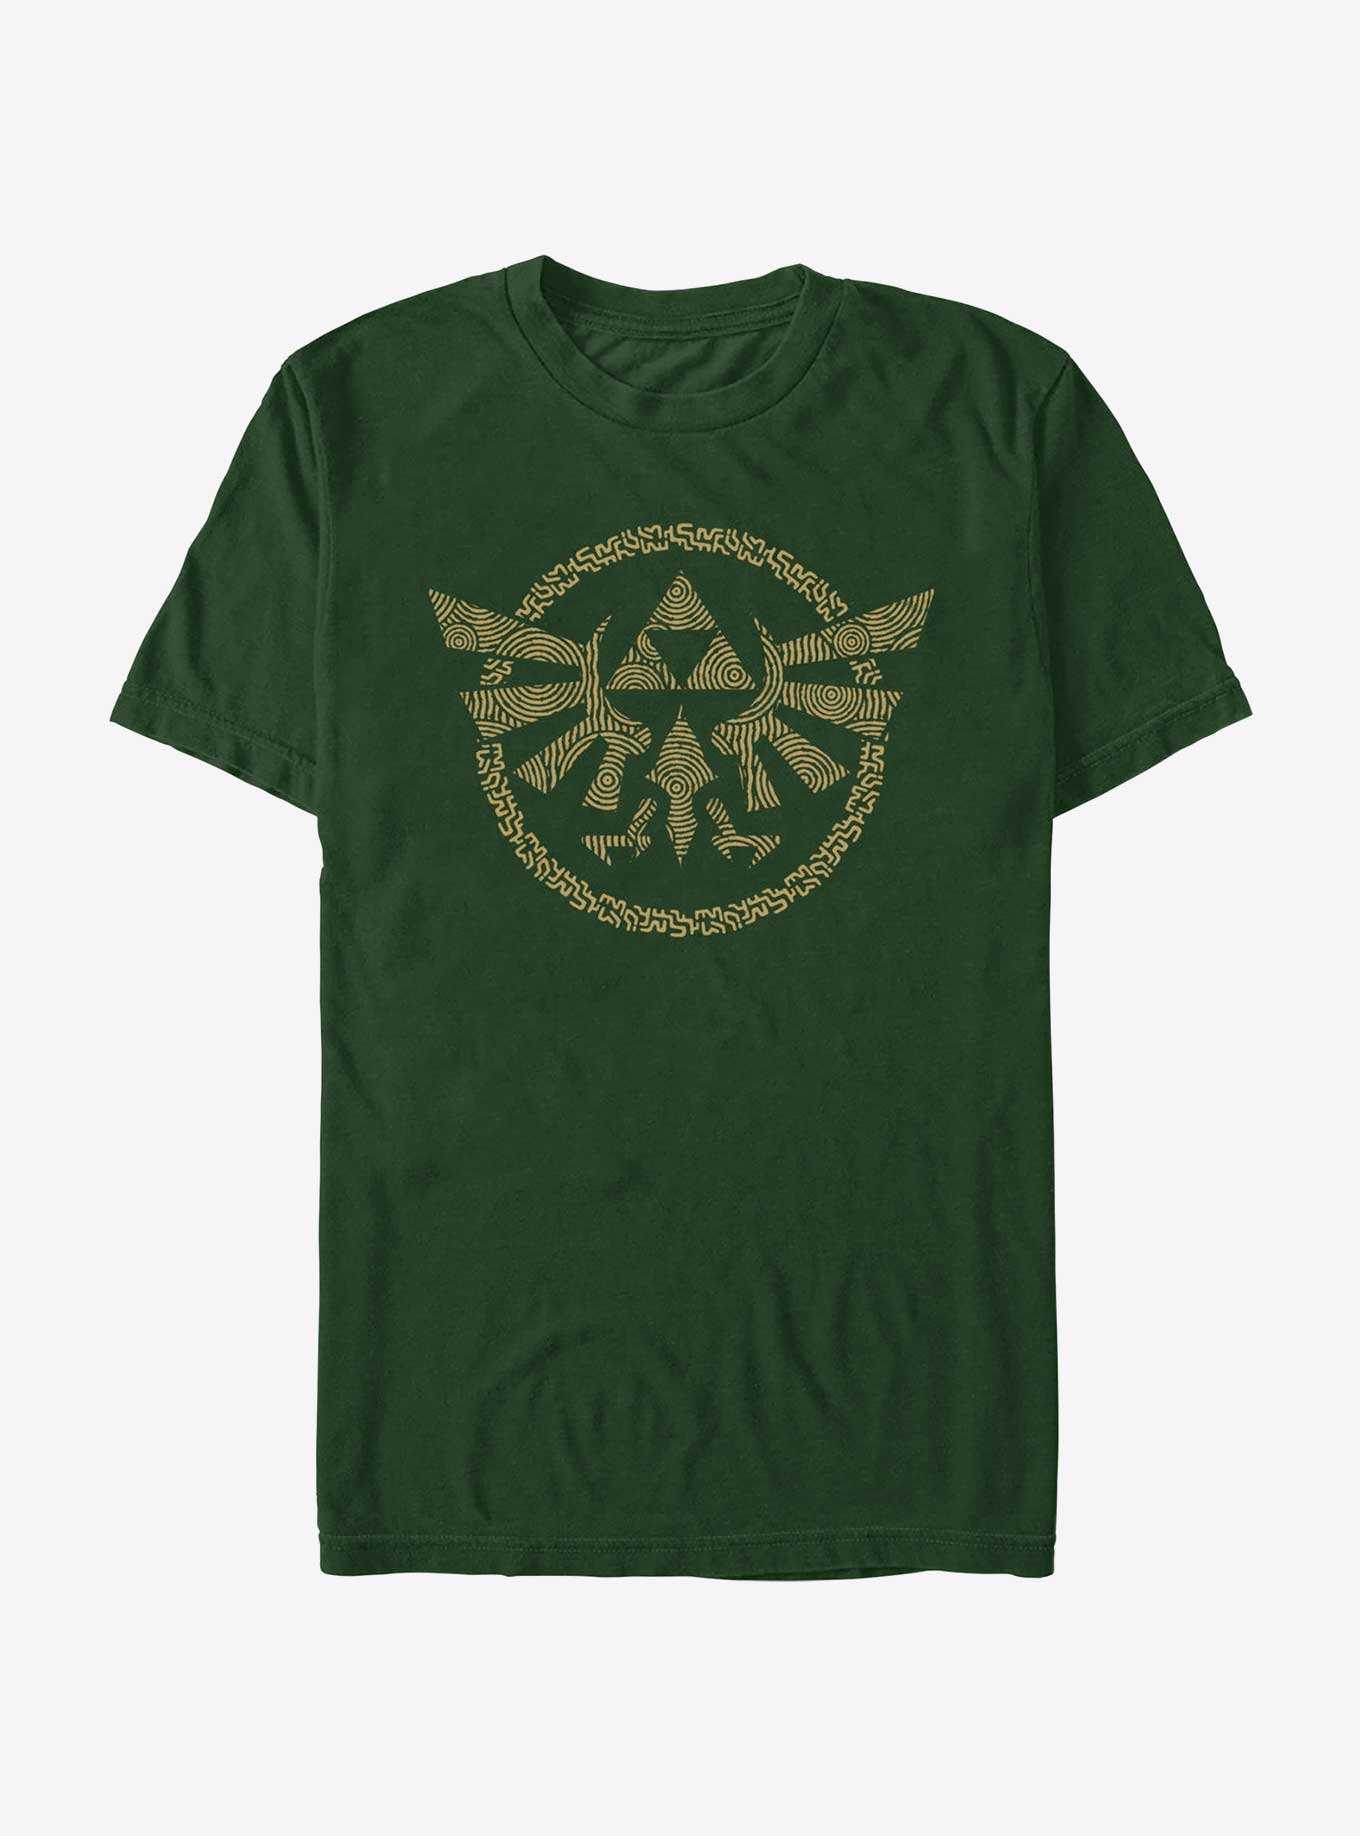 Zelda Merch  Zelda Merch Store with Perfect Design, Excellent Material,  and Big Discount. Fast Shipping Worldwide.